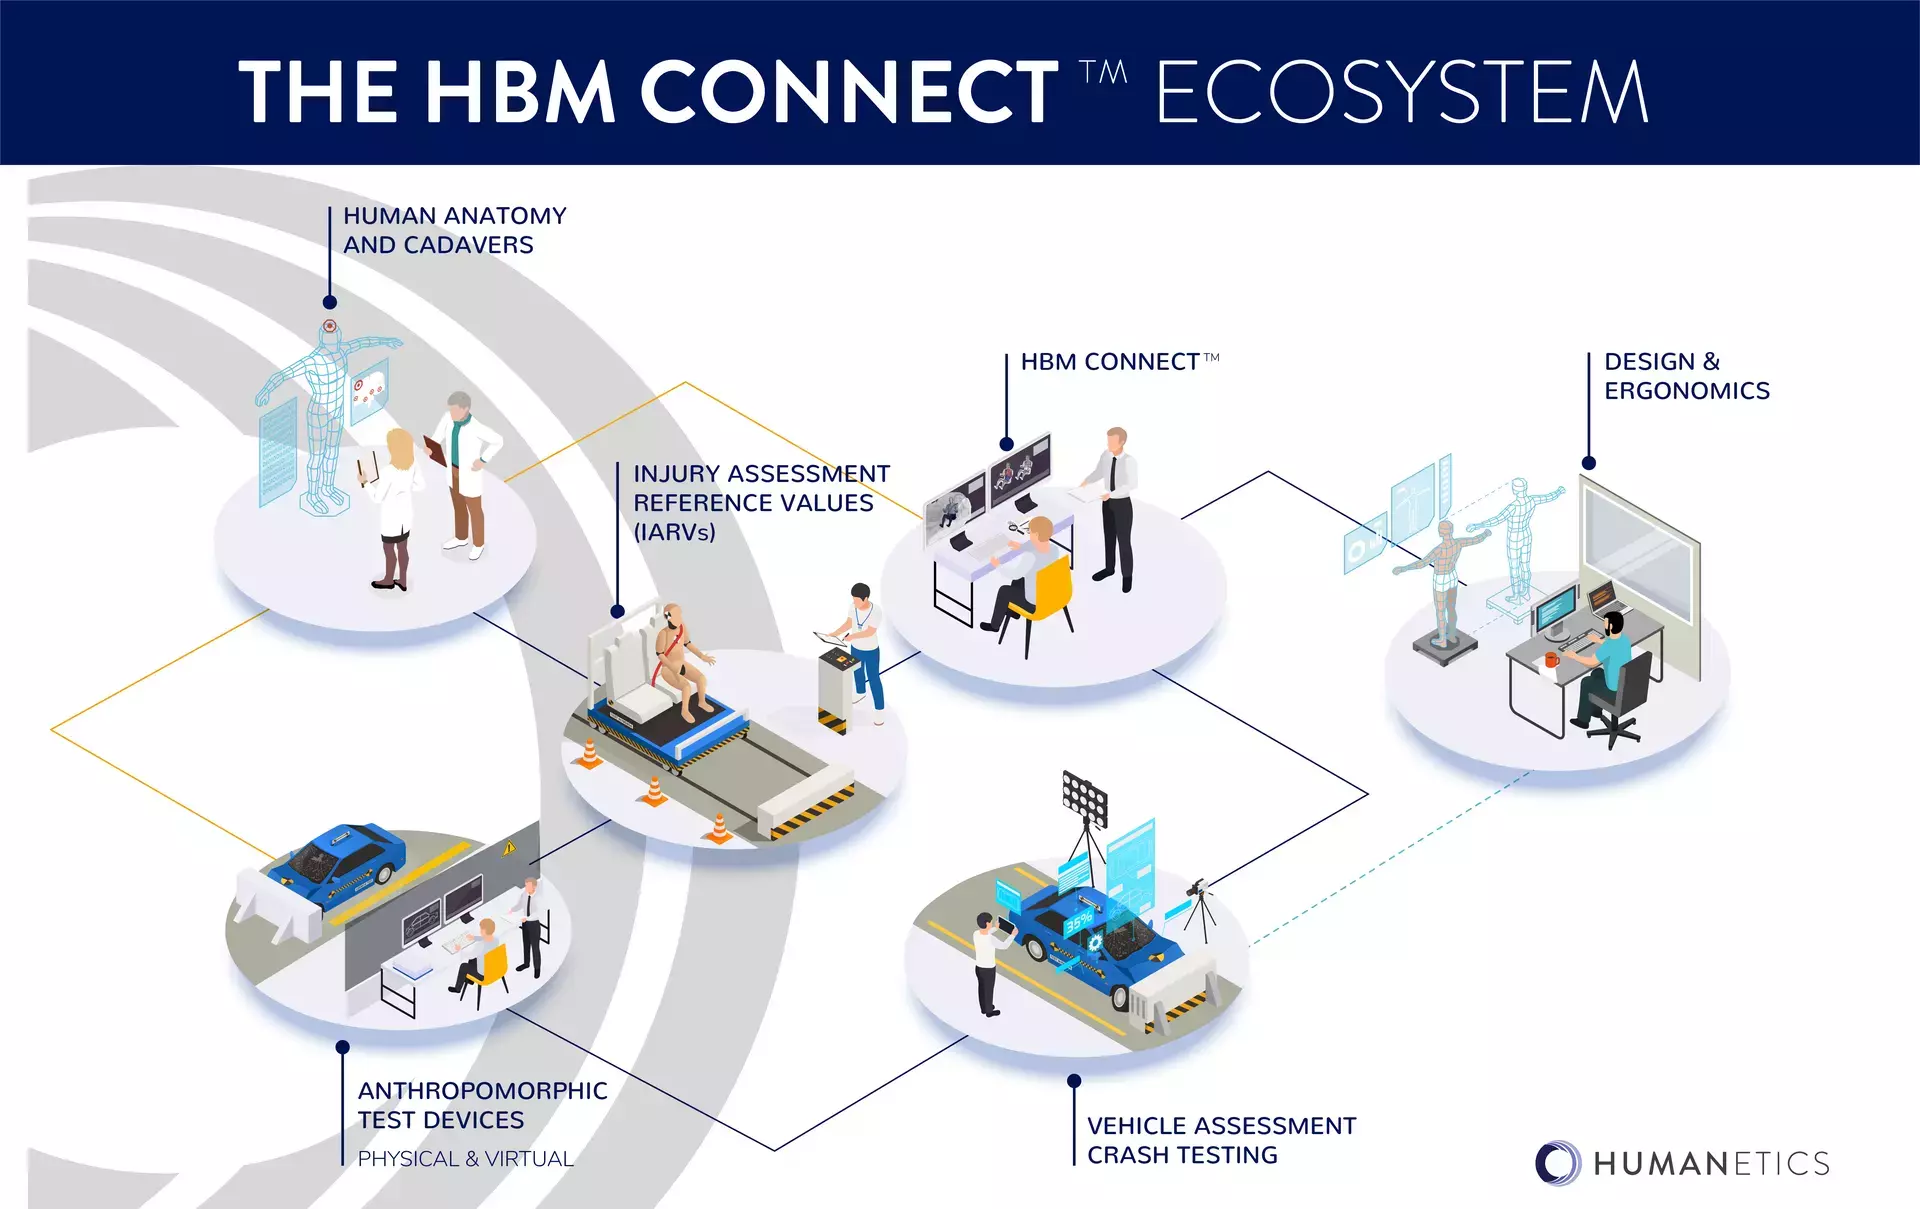 The HBM Connect Ecosystem